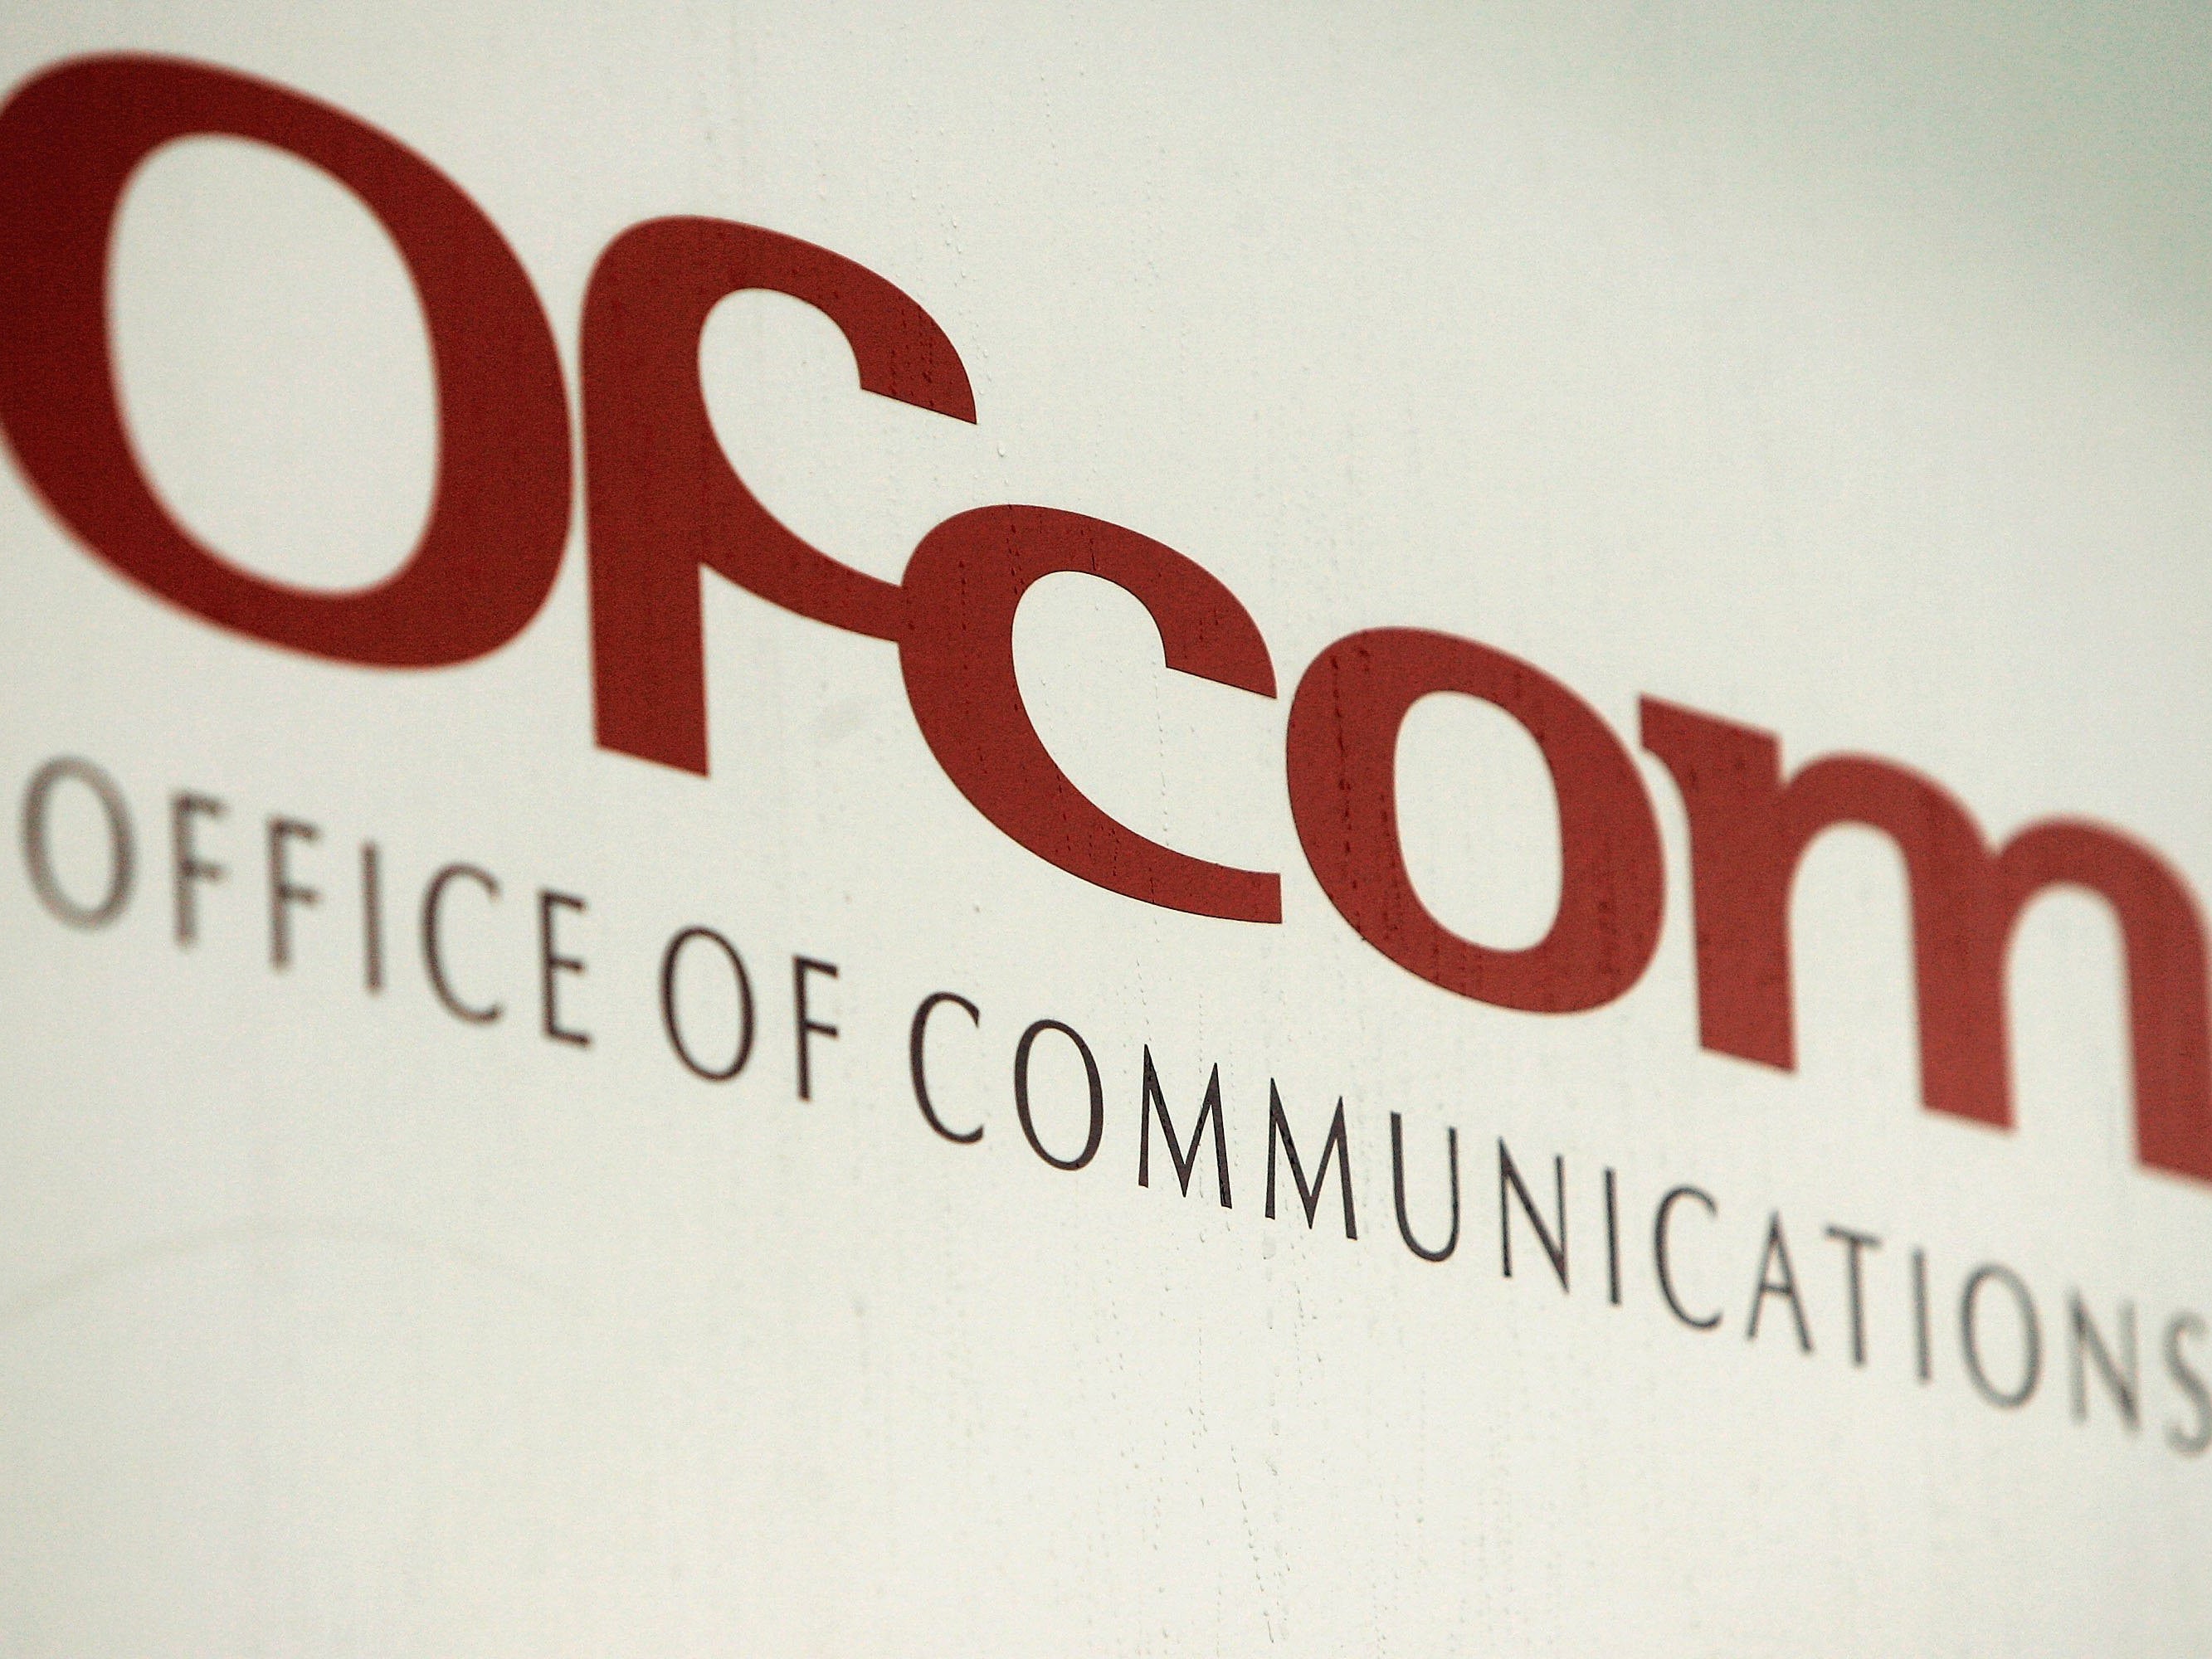 Ofcom has found Fox News in breach of the broadcasters' code